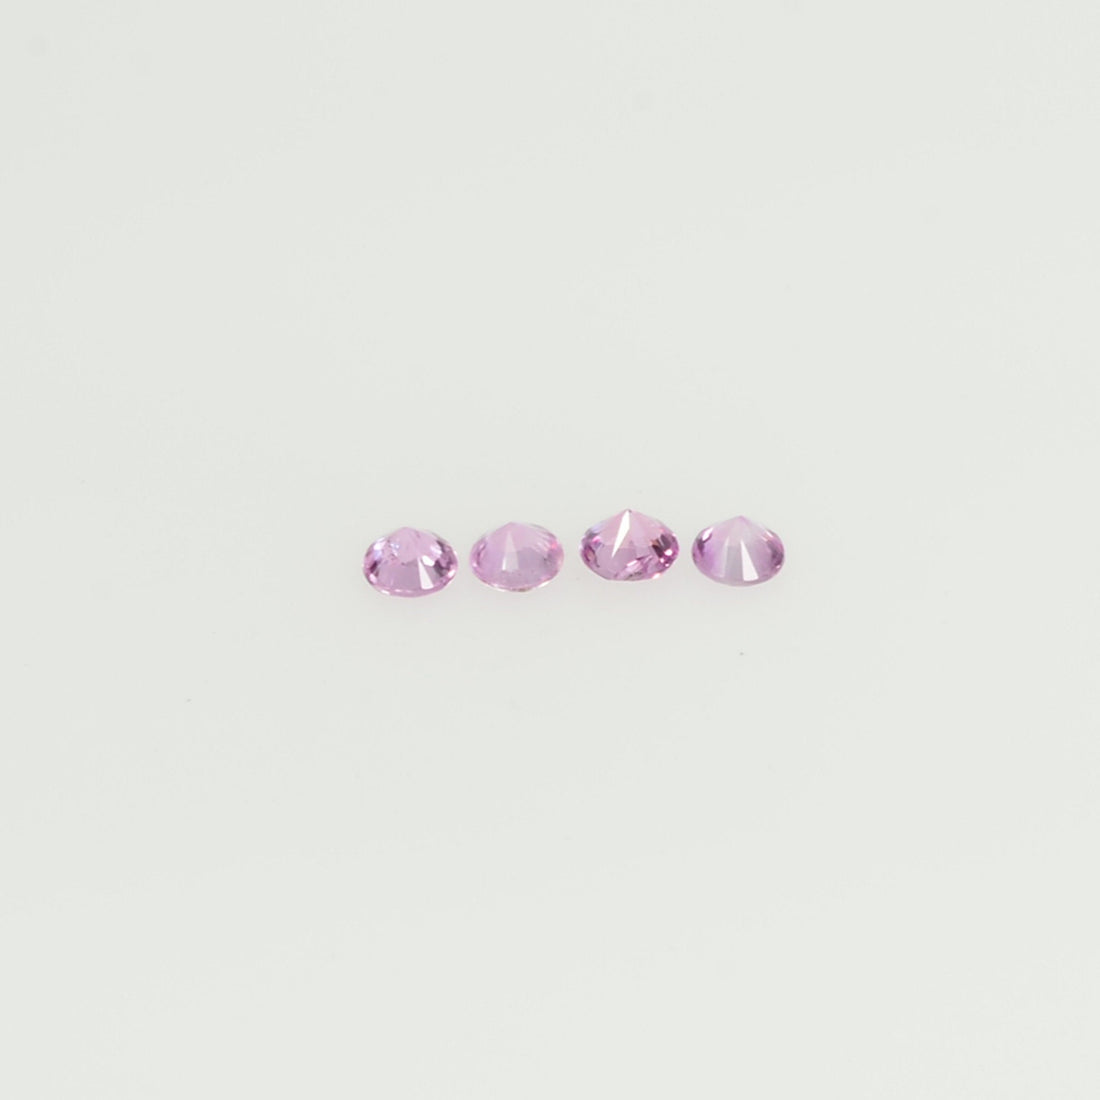 1.8-2.3 mm Natural Pink Sapphire Loose Gemstone Round Diamond Cut Vs Quality Color